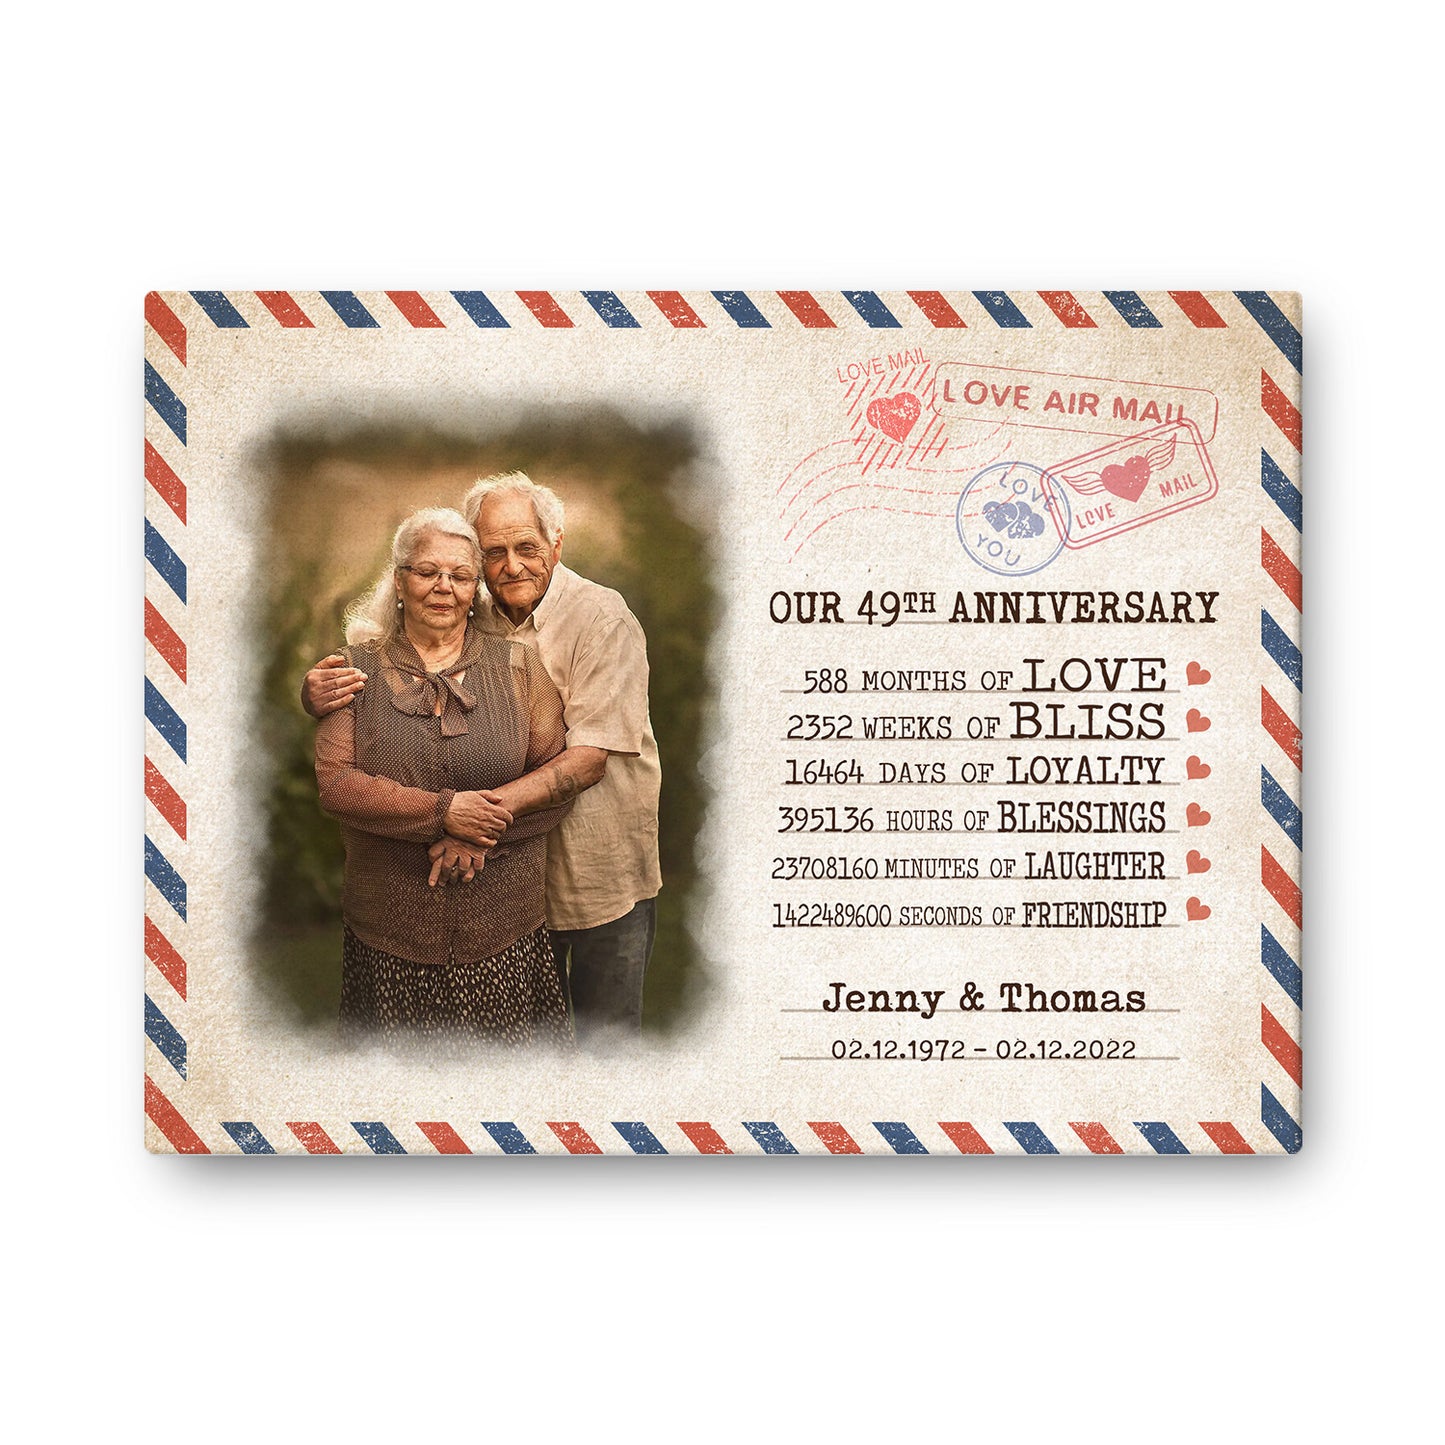 Our 49th Anniversary Letter Valentine Gift Personalized Canvas